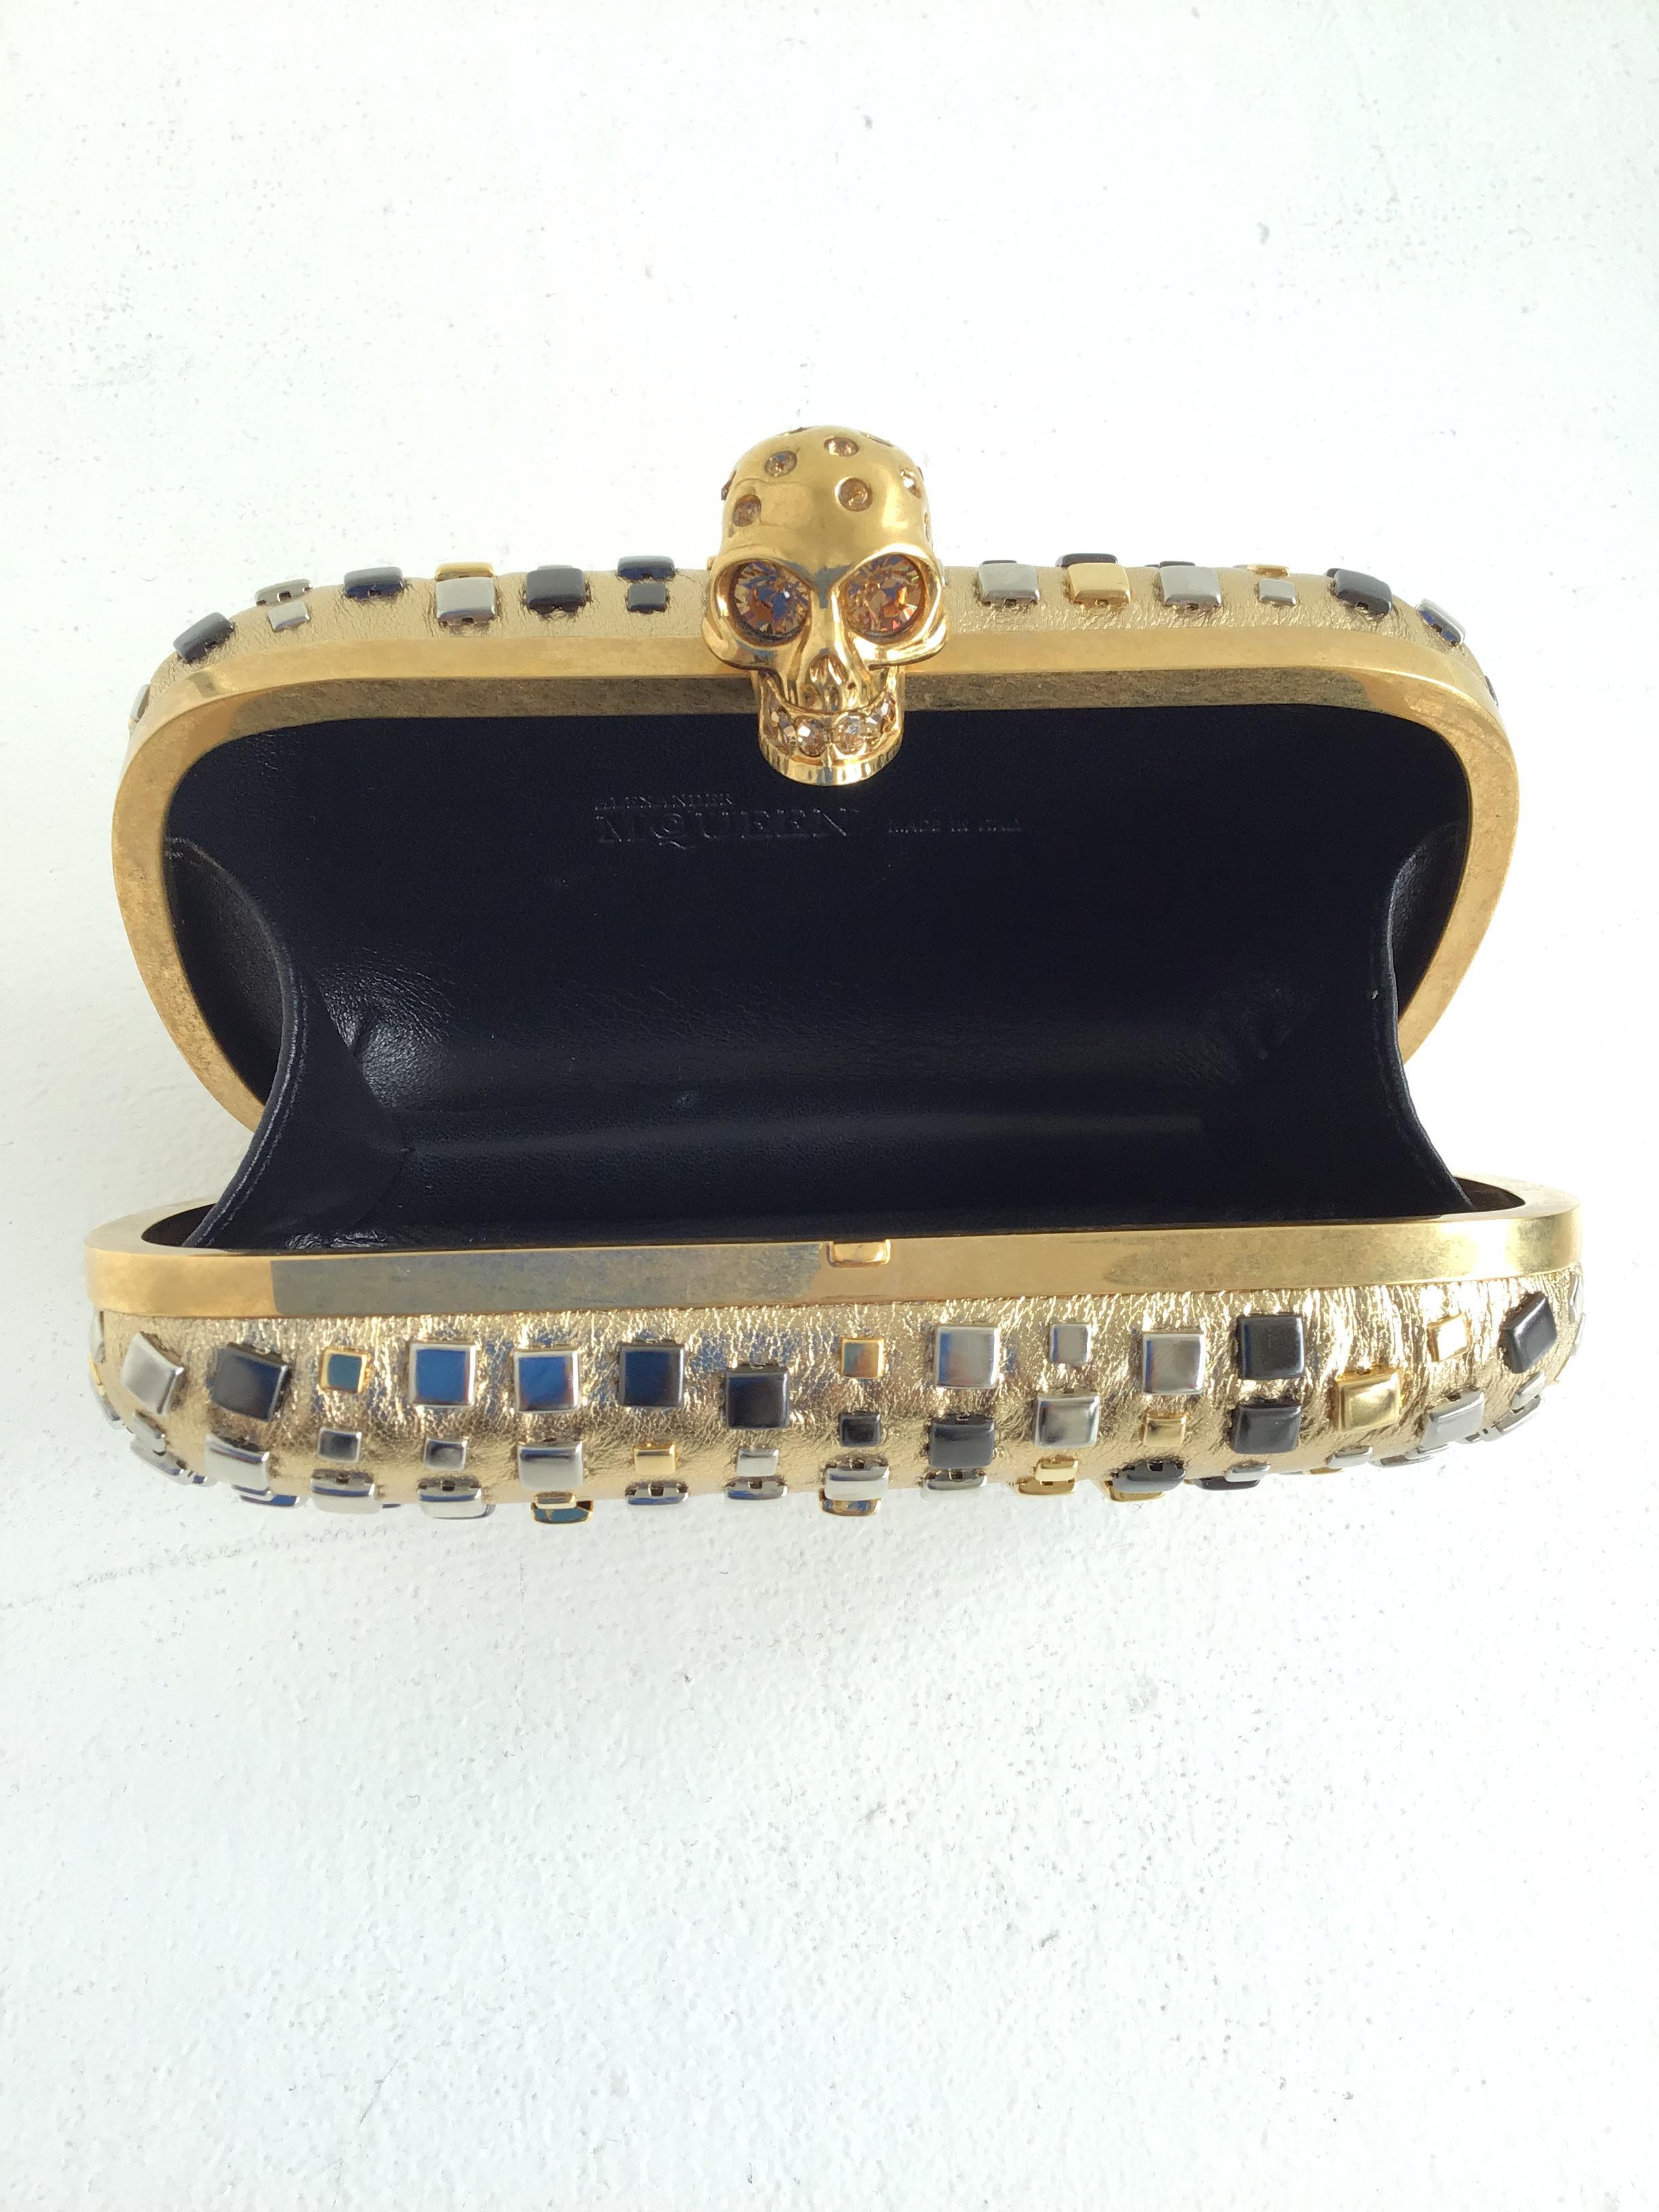 Alexander McQueen Skull Studded Metallic Leather Box Clutch
Description:
Outer Shell: Metallic Gold Lamb Leather with Multicolored Studs 
Gold Jeweled Skull Flip Lock Closure
Inner Shell: Black Leather Lining
